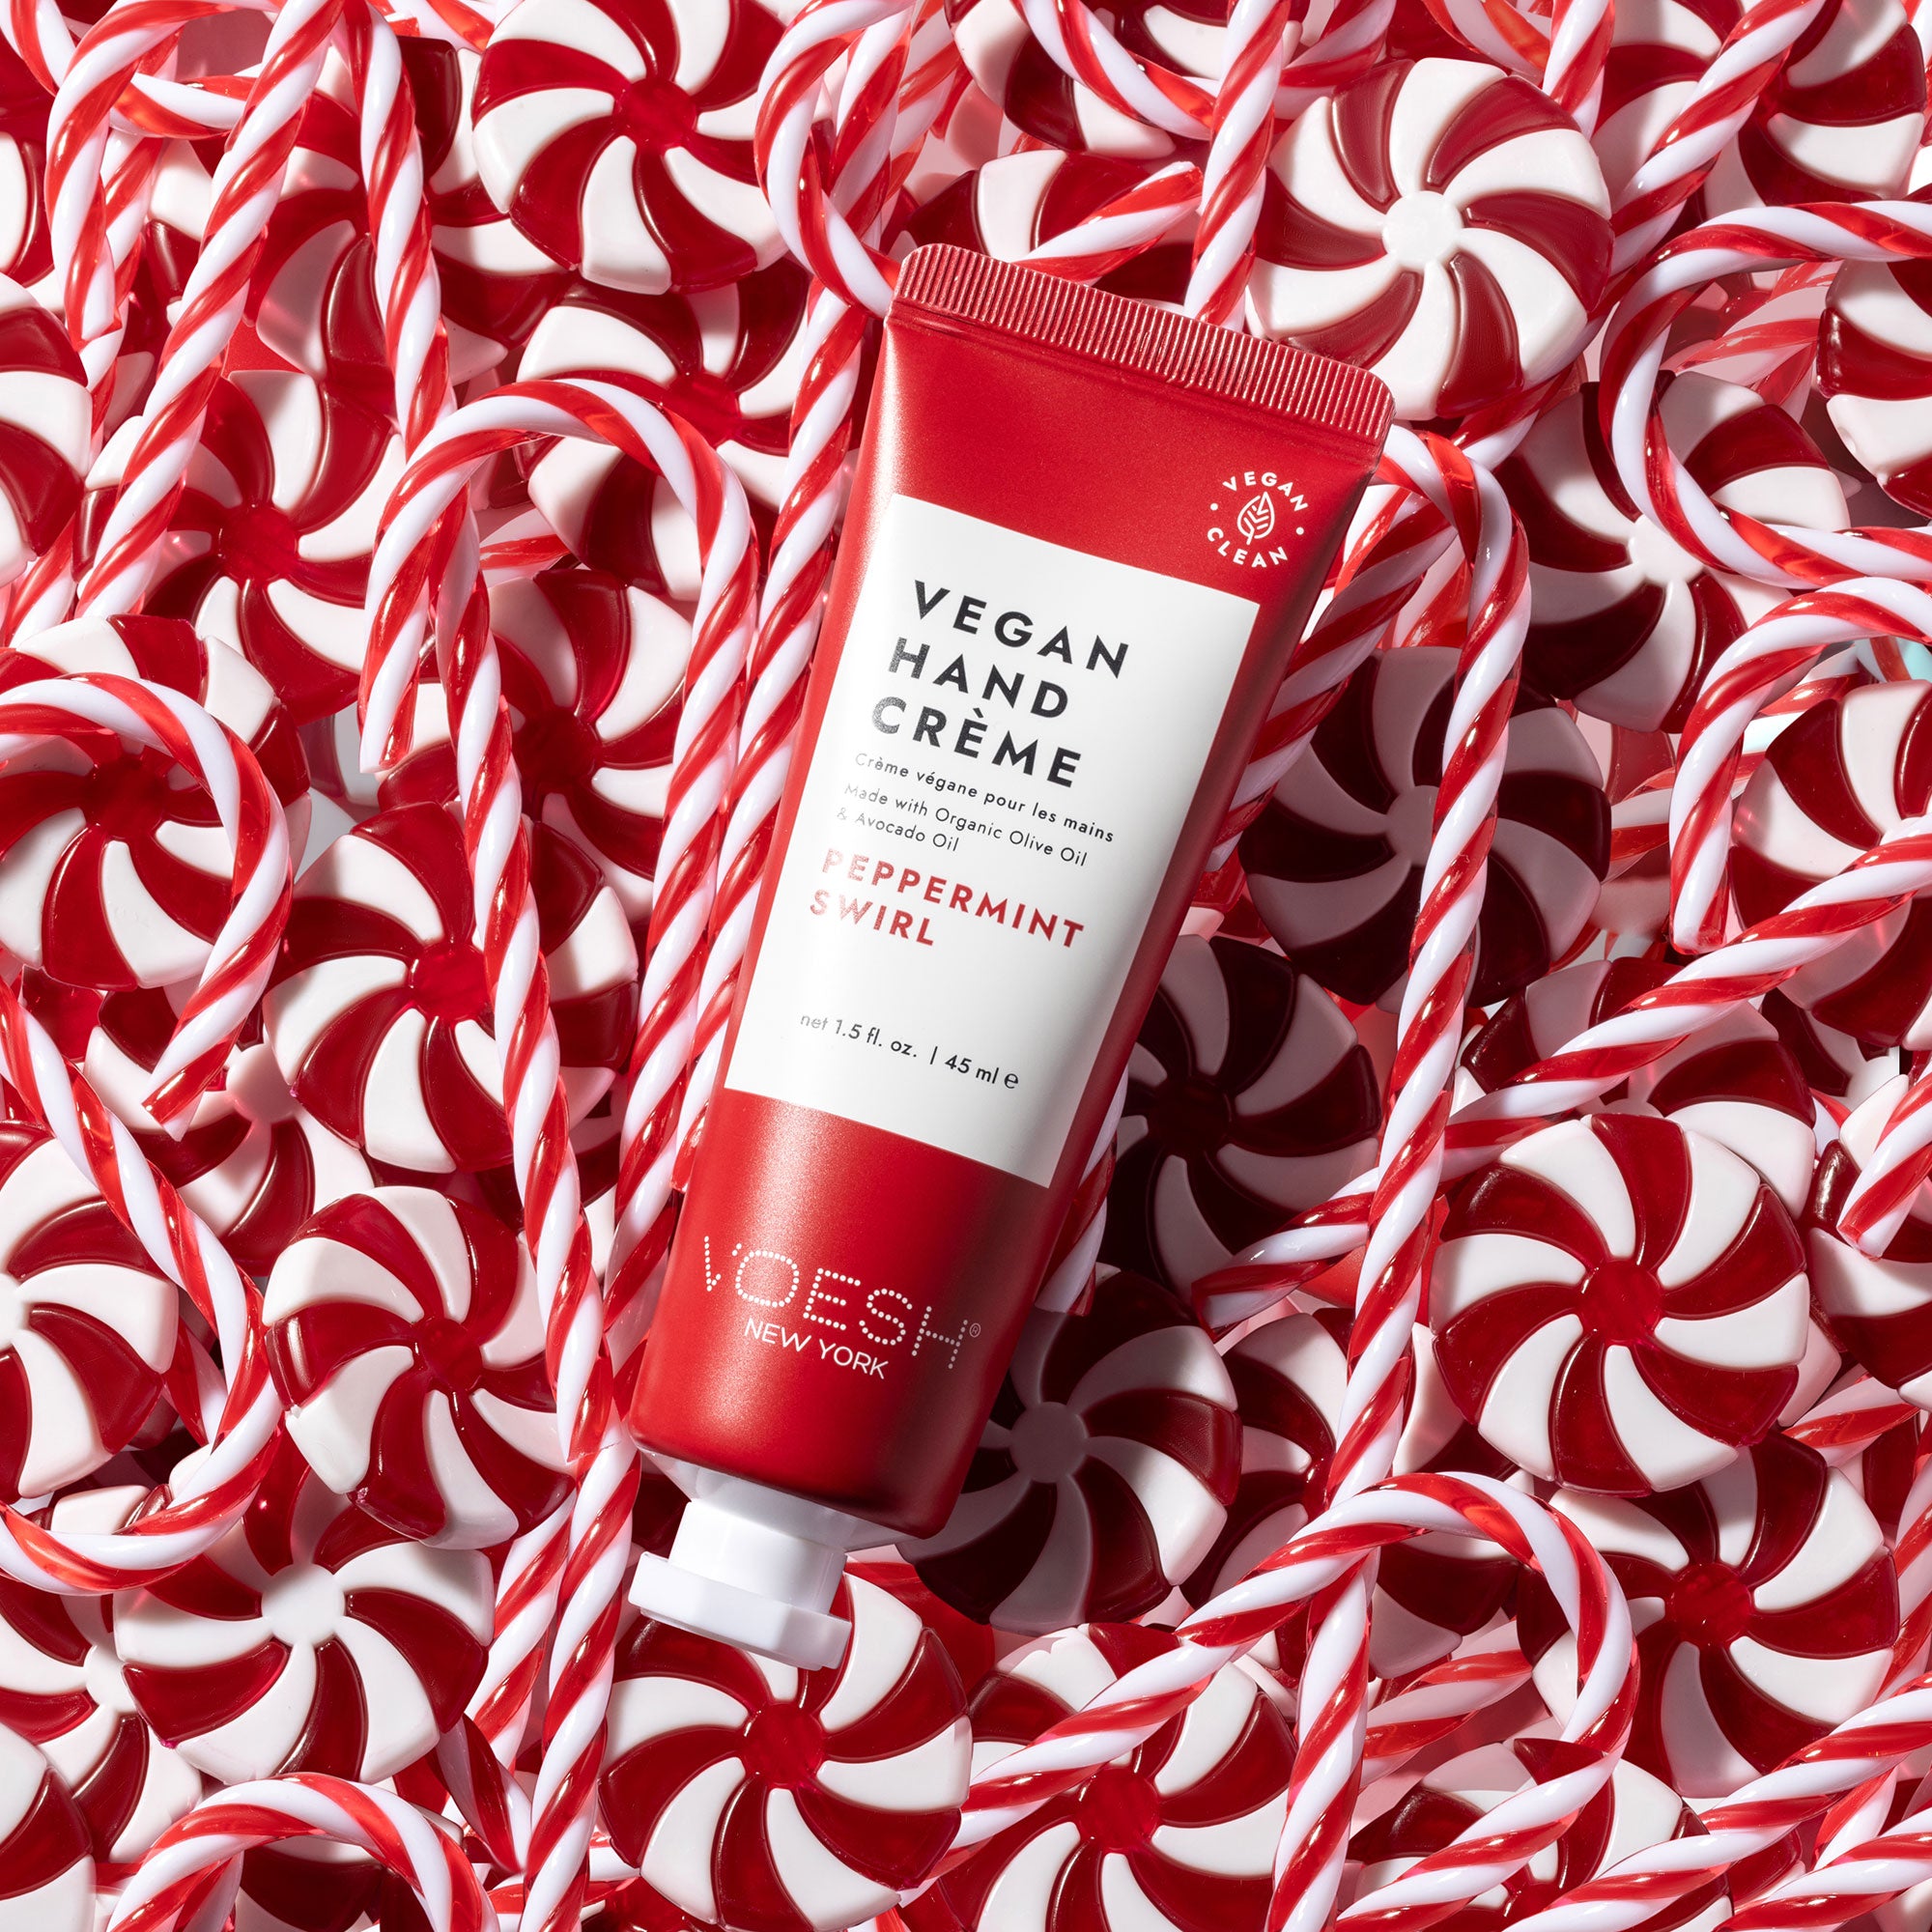 Peppermint Swirl lotion on top of peppermint candies